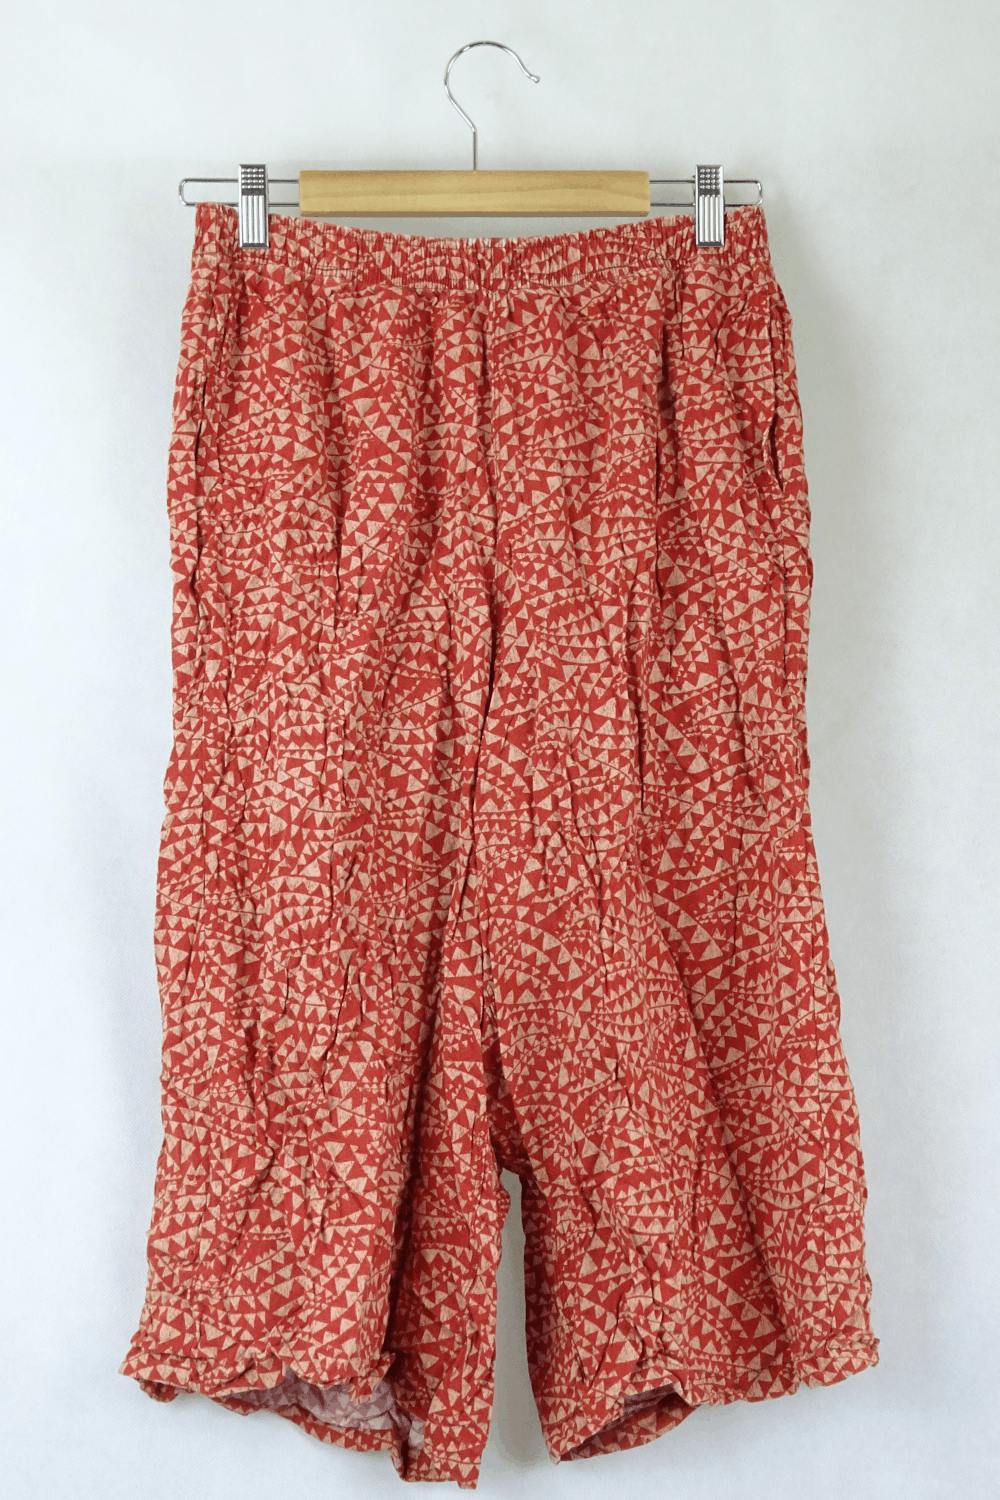 Uniqlo Red Patterned Skirt M